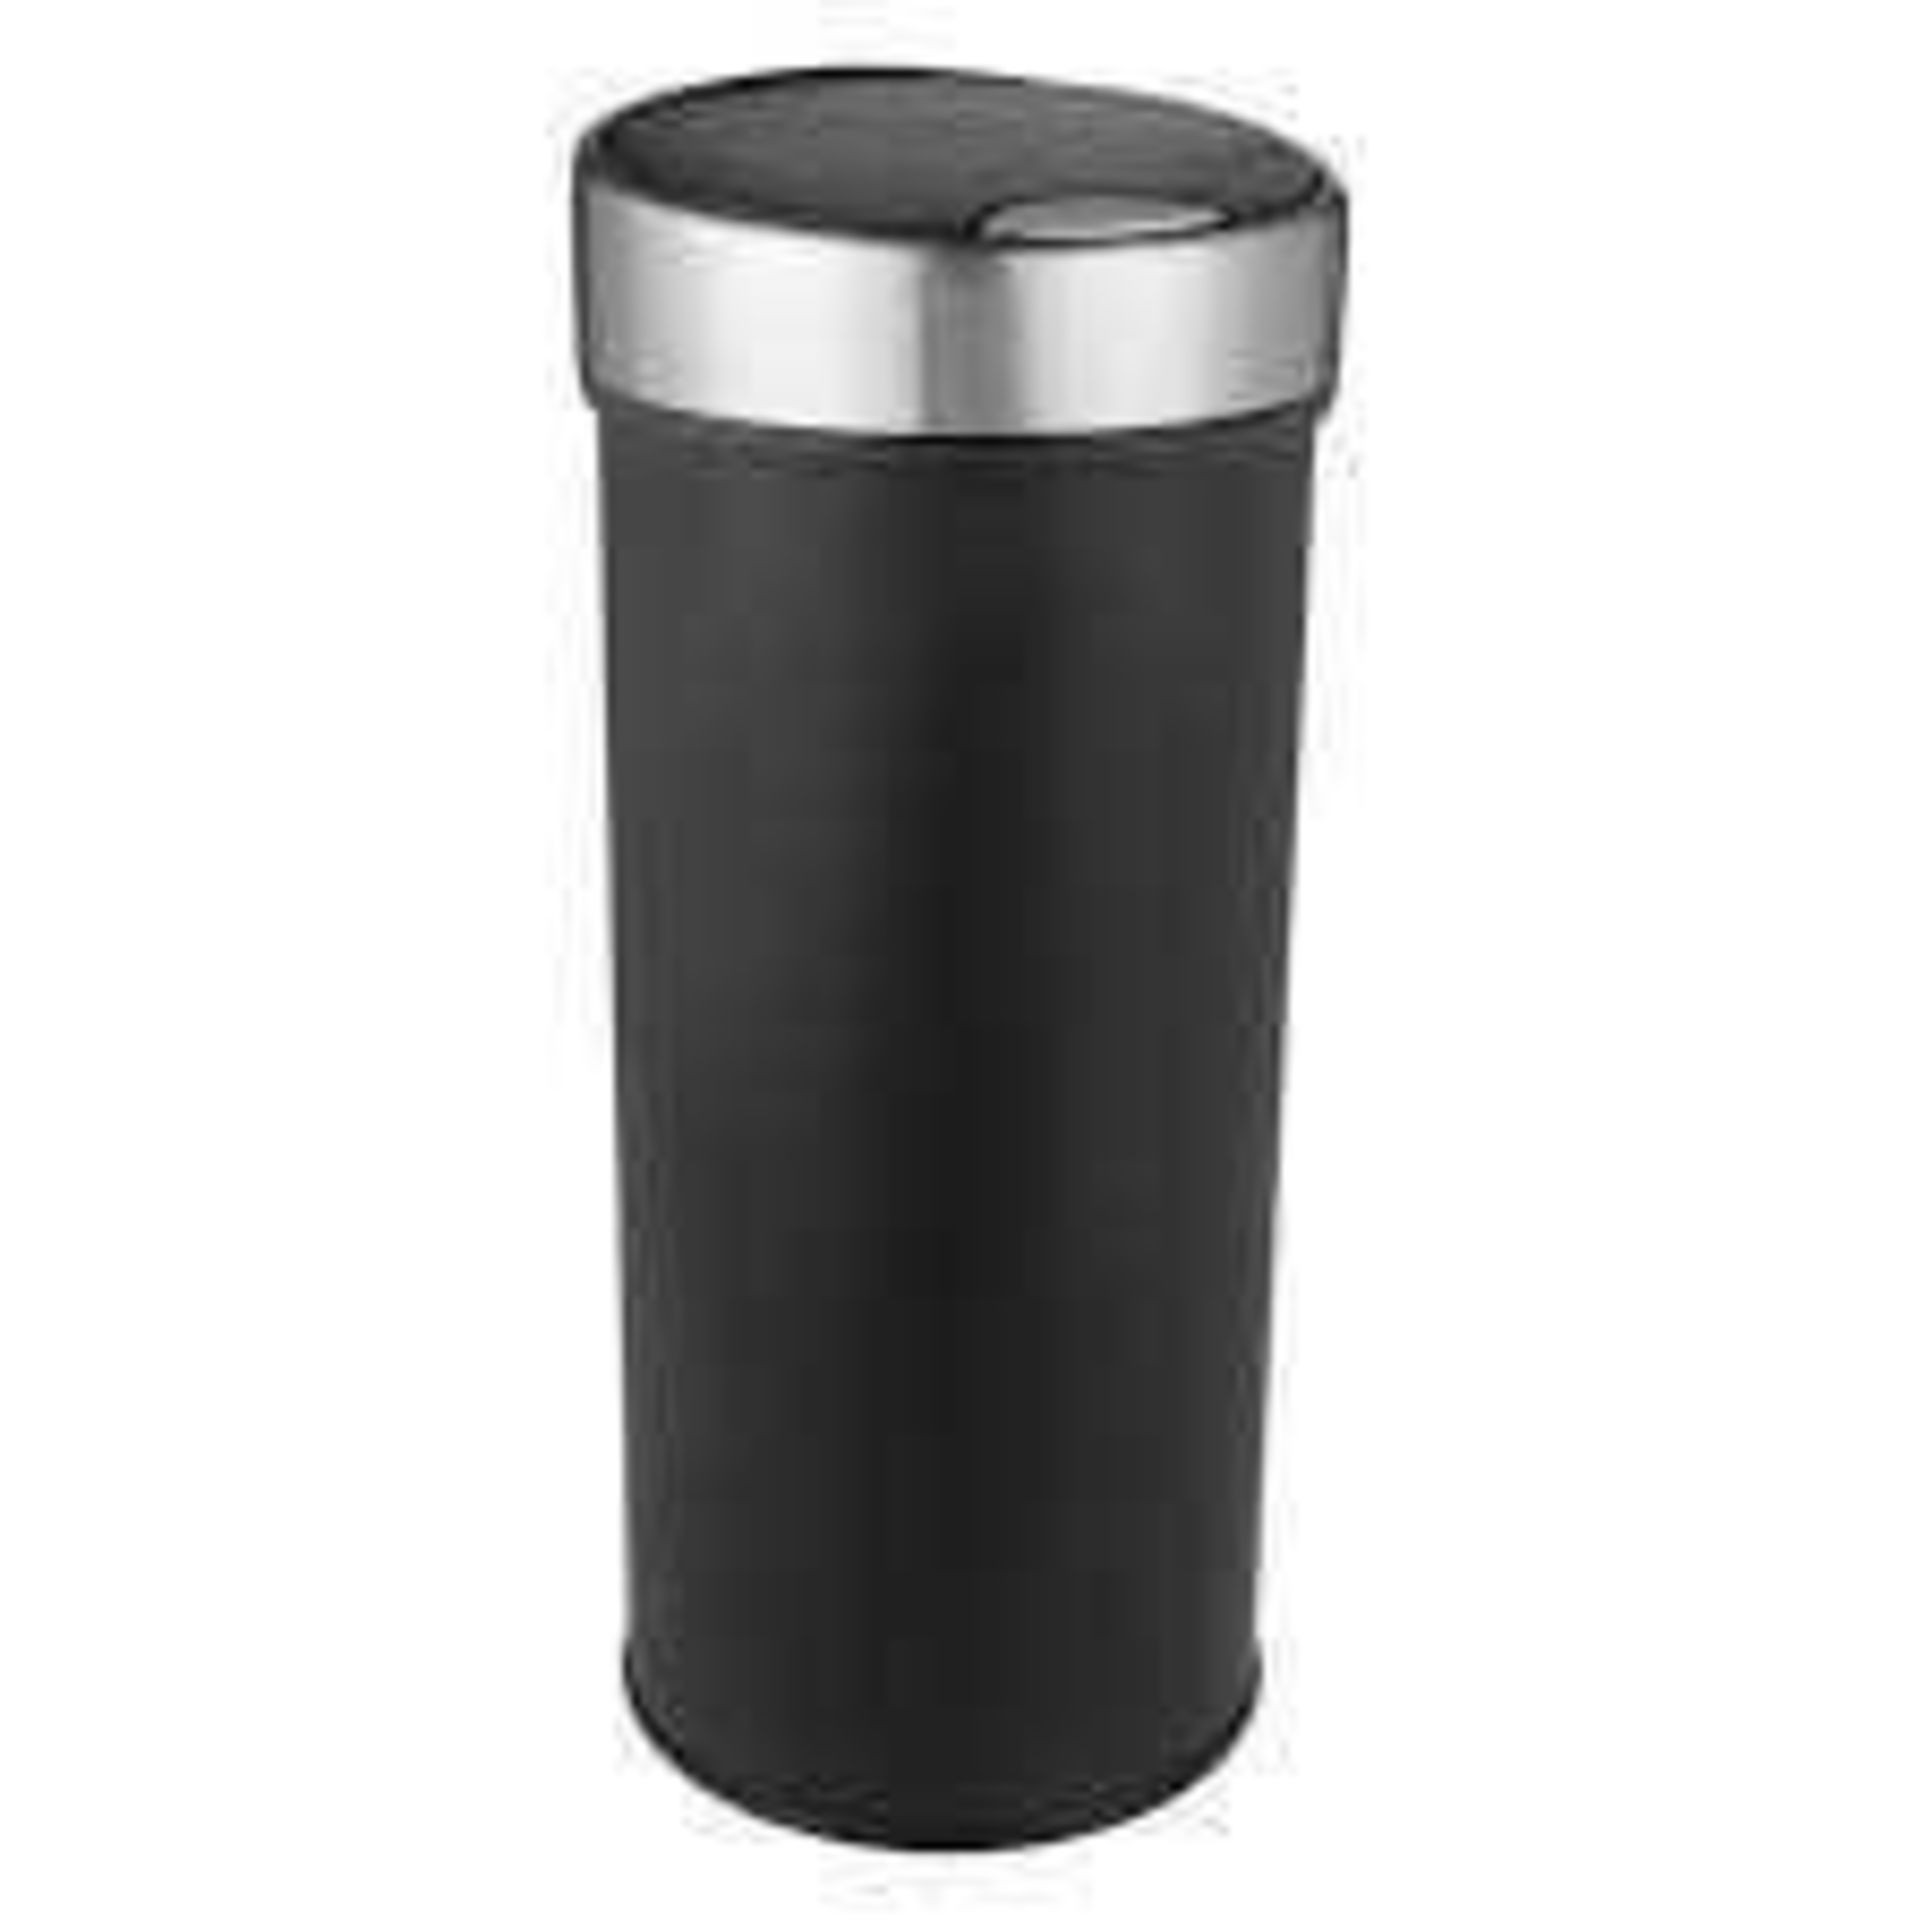 Combined RRP £80 Lot To Contain 2 Boxed John Lewis Touch Top Bin In Stone And Black - Image 2 of 2